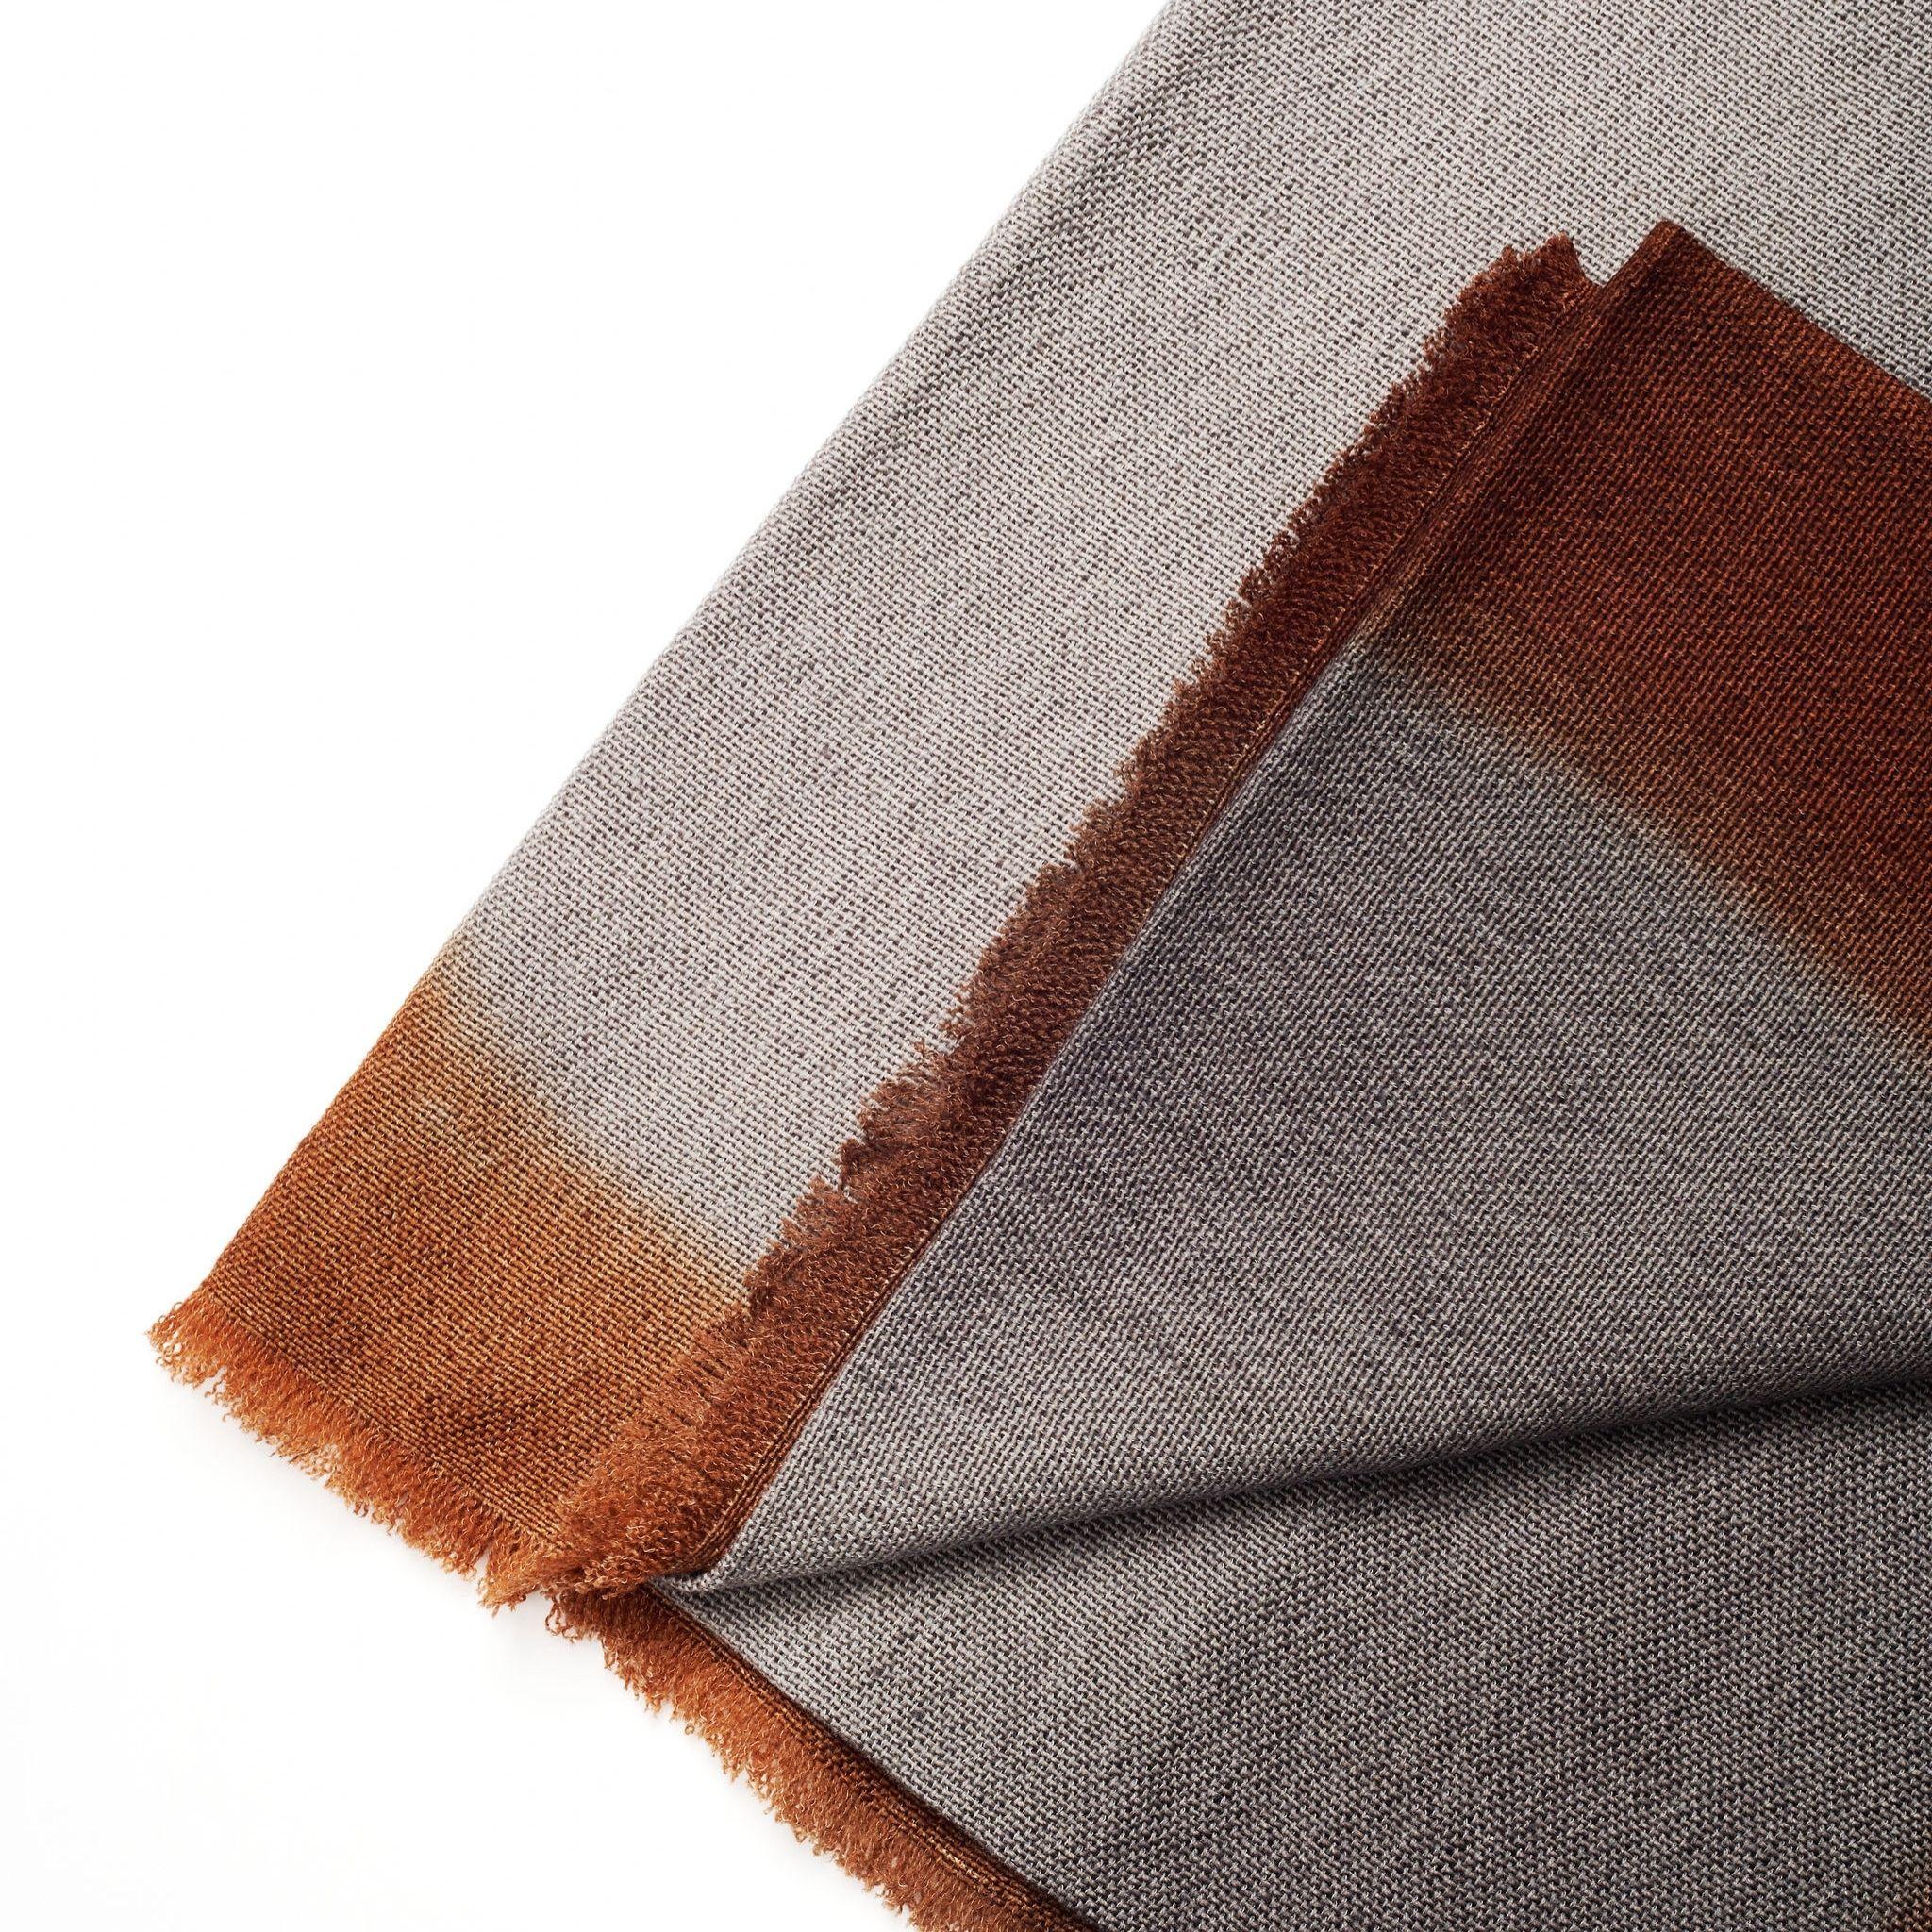 Modern Simply Taupe Merino Throw Handwoven in Hand-spun Merino Using Warm Ombre Hues For Sale